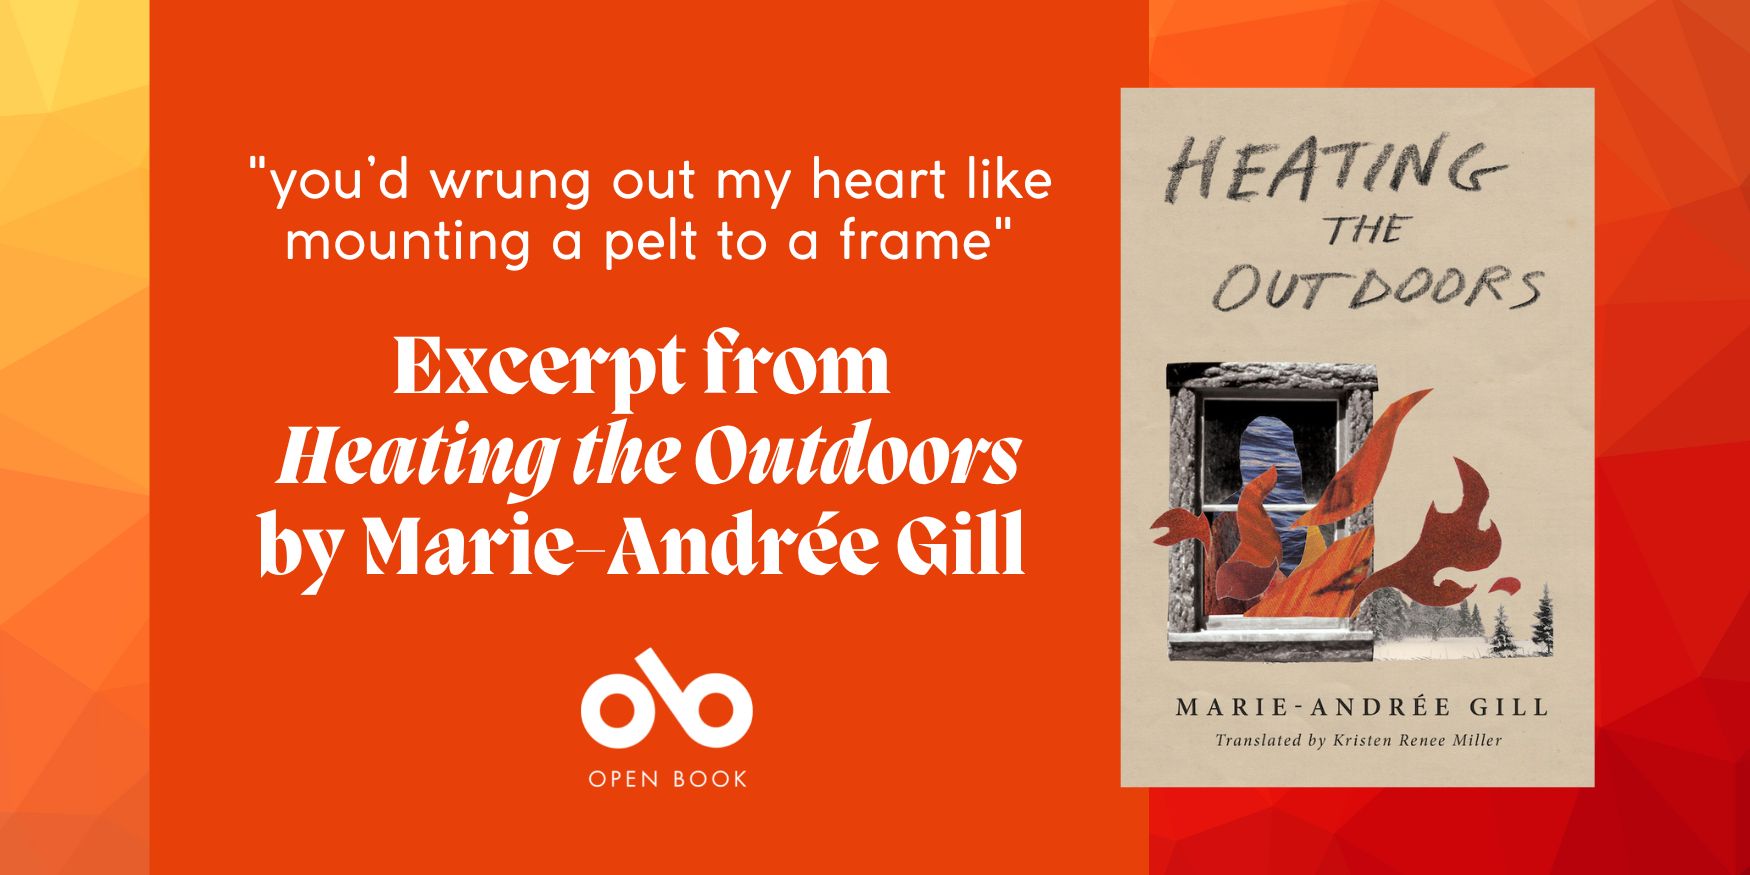 Graphic: Orange background with an image of the cover of Heating the Outdoors by Marie-Andrée Gill. Text on the left reads "you'd wrung out my heart like mounting a pelt to a frame. Excerpt from Heating the Outdoors by Marie-Andrée Gill". Open Book logo centred below text.